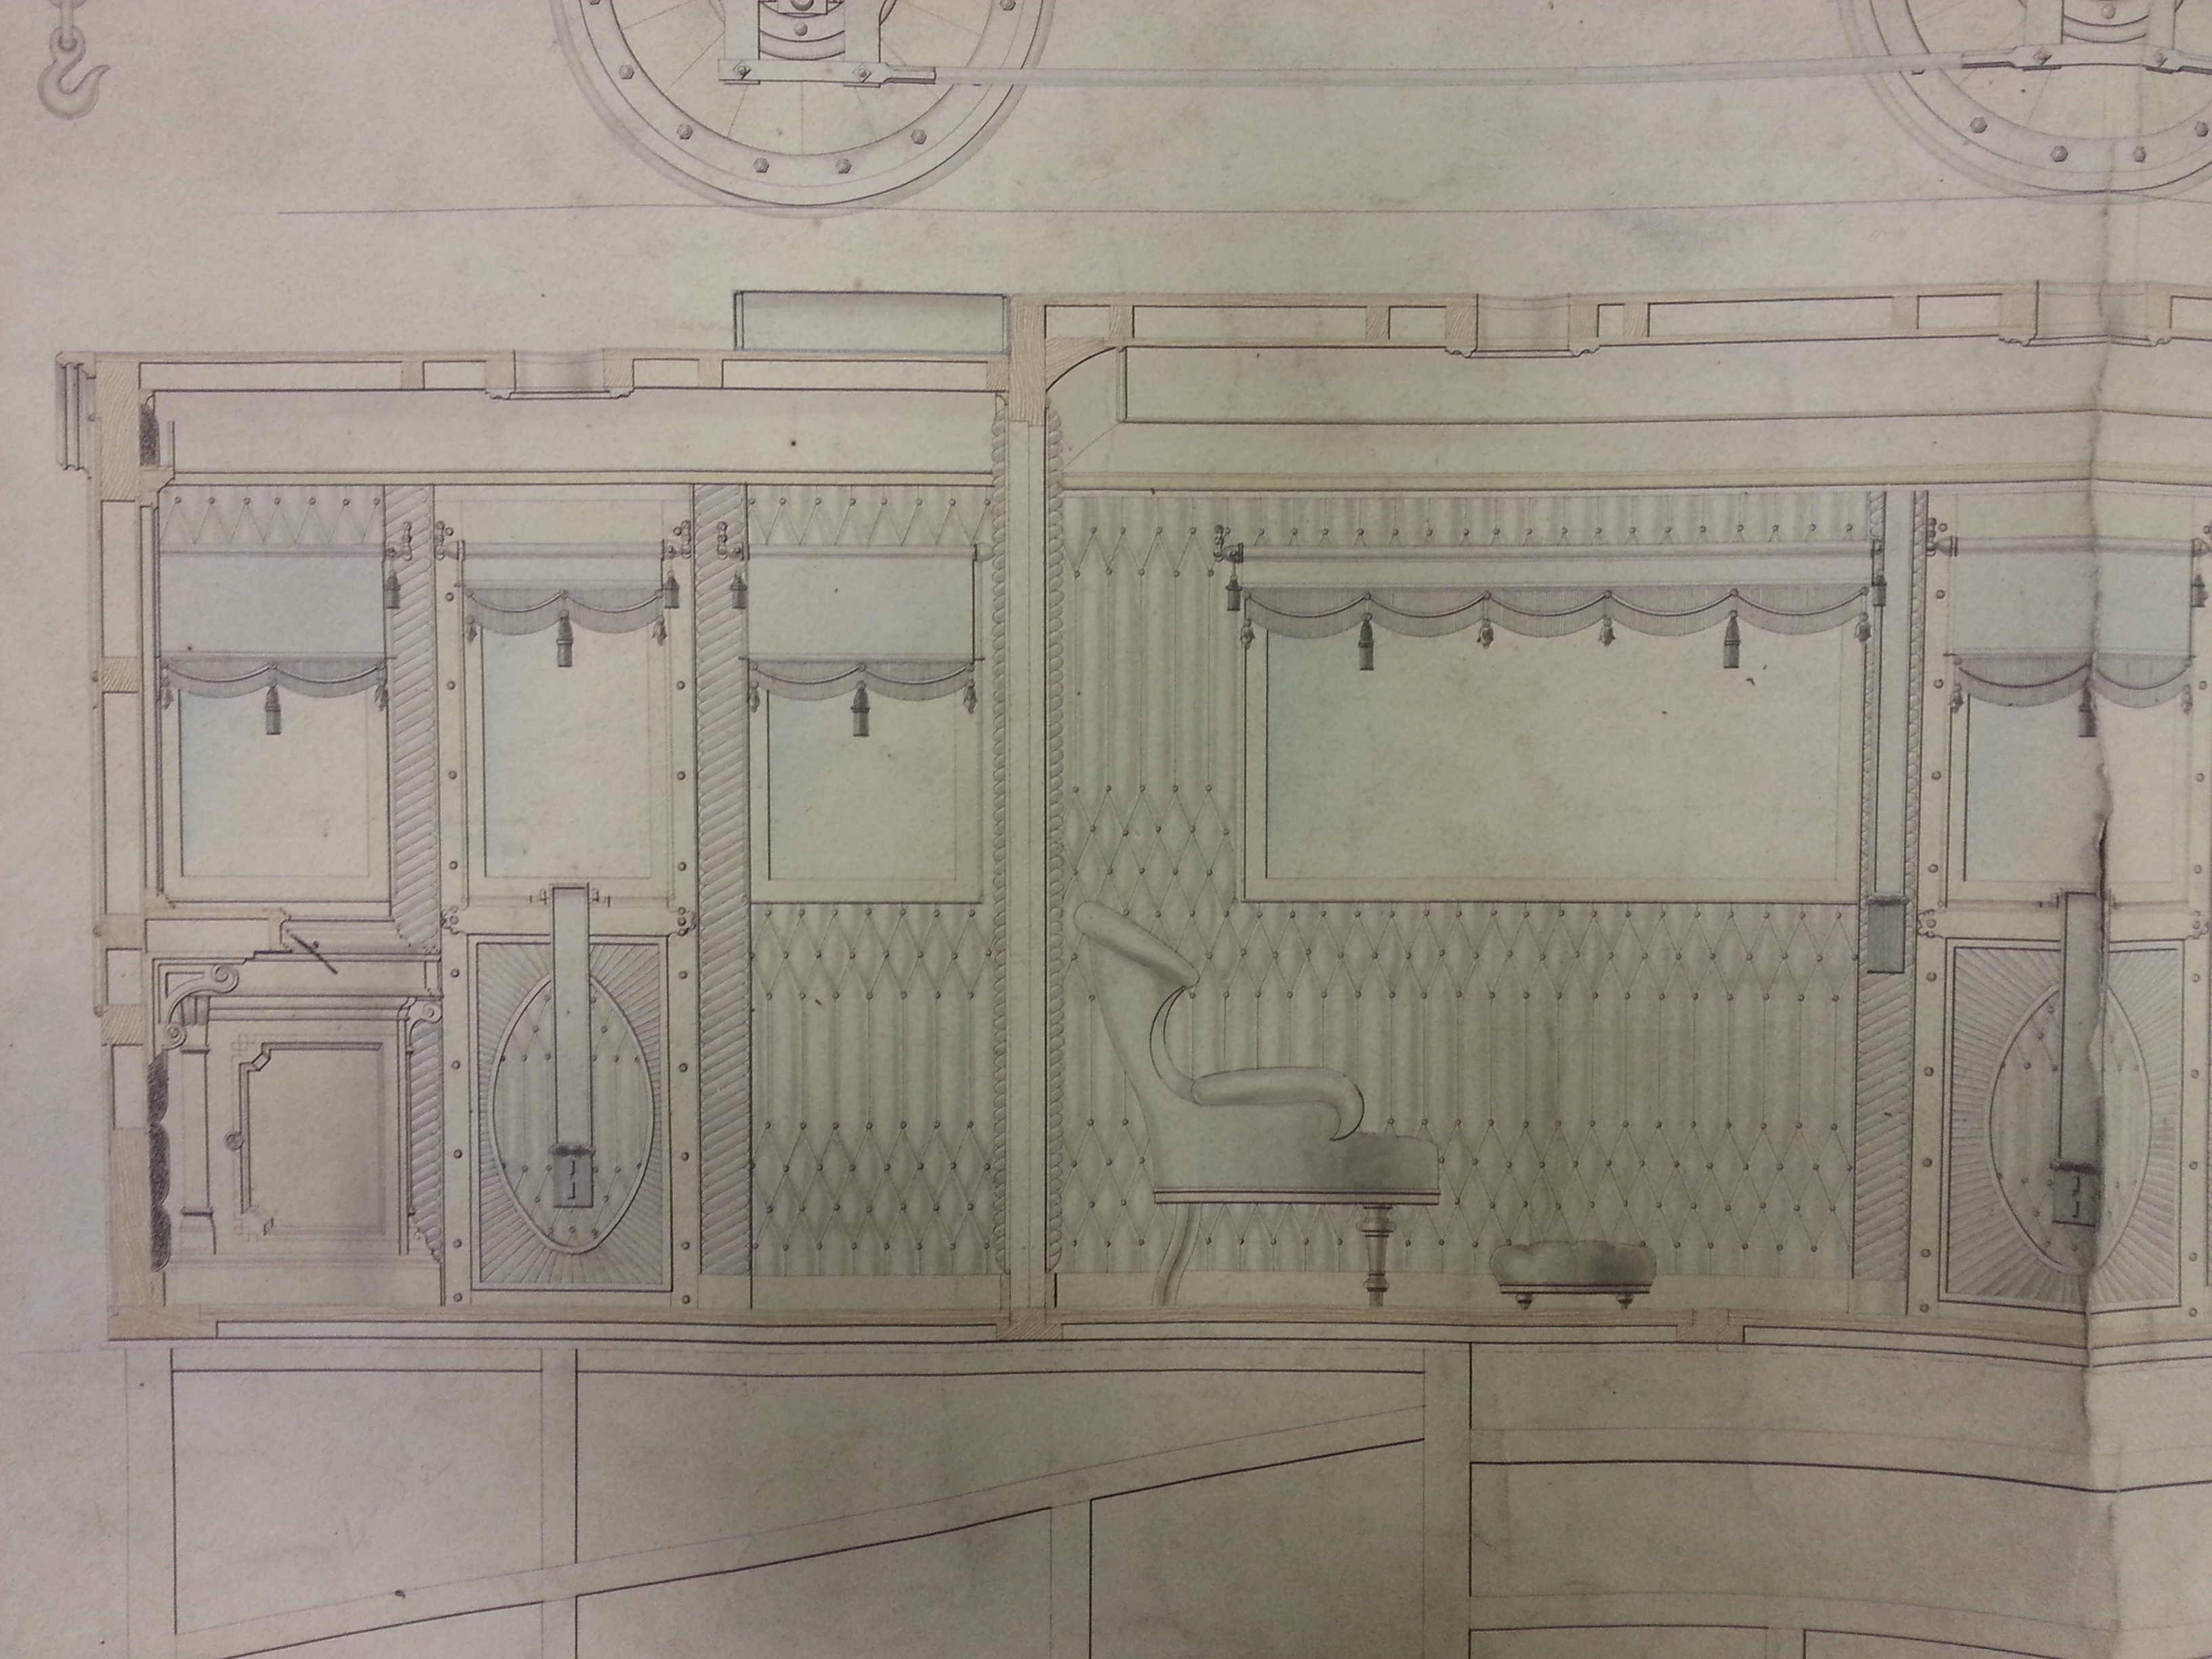 Part of the drawing for the LCDR's Royal Saloon. The degree of detail the draughtsman has included demonstrates the pride in producing the drawing for such an important vehicle.